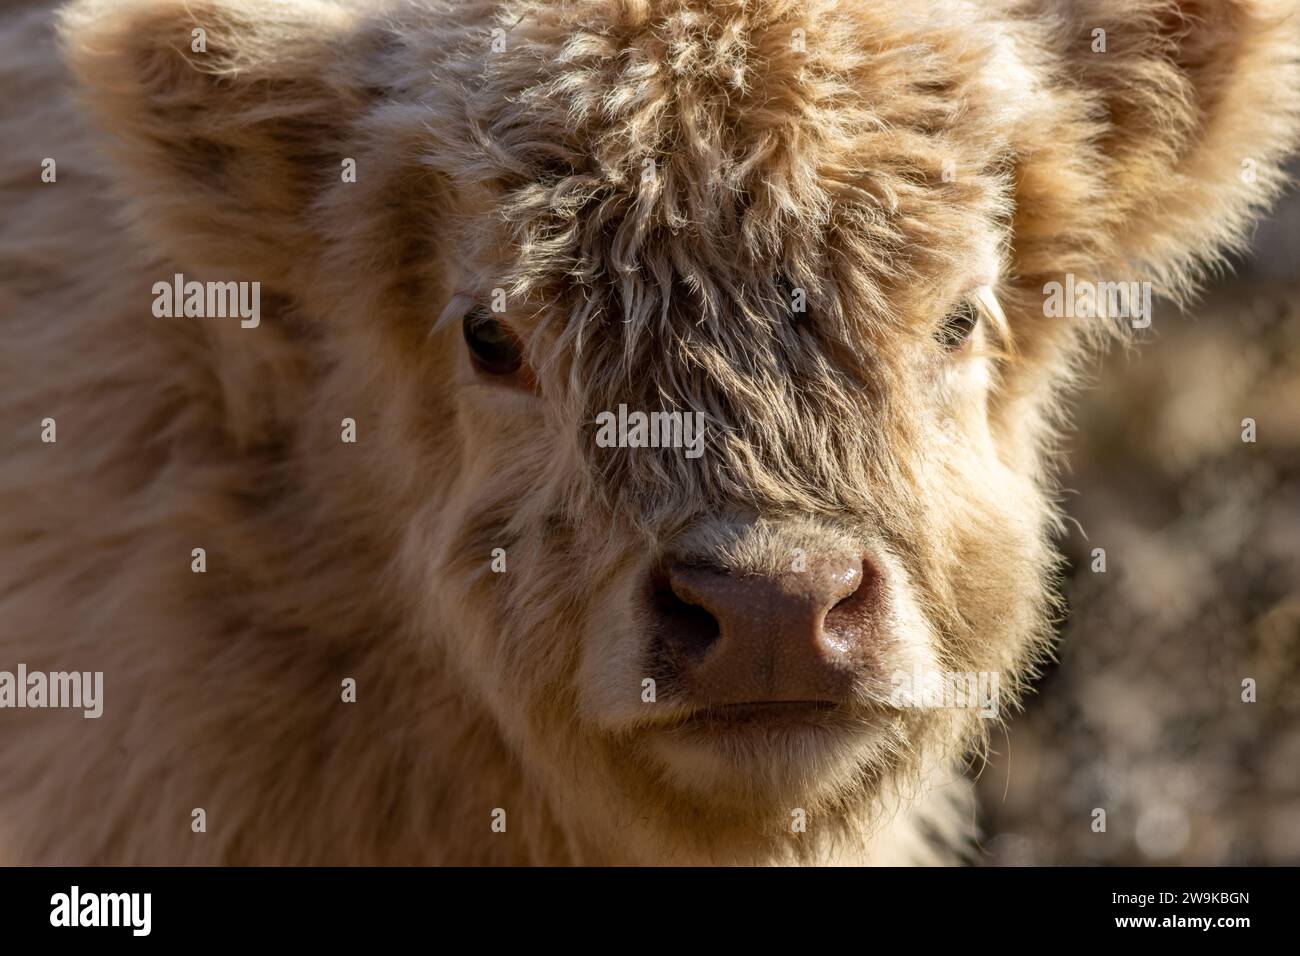 Highland Cattle Calf closeup with light tan shaggy fur in late afternoon sun Stock Photo